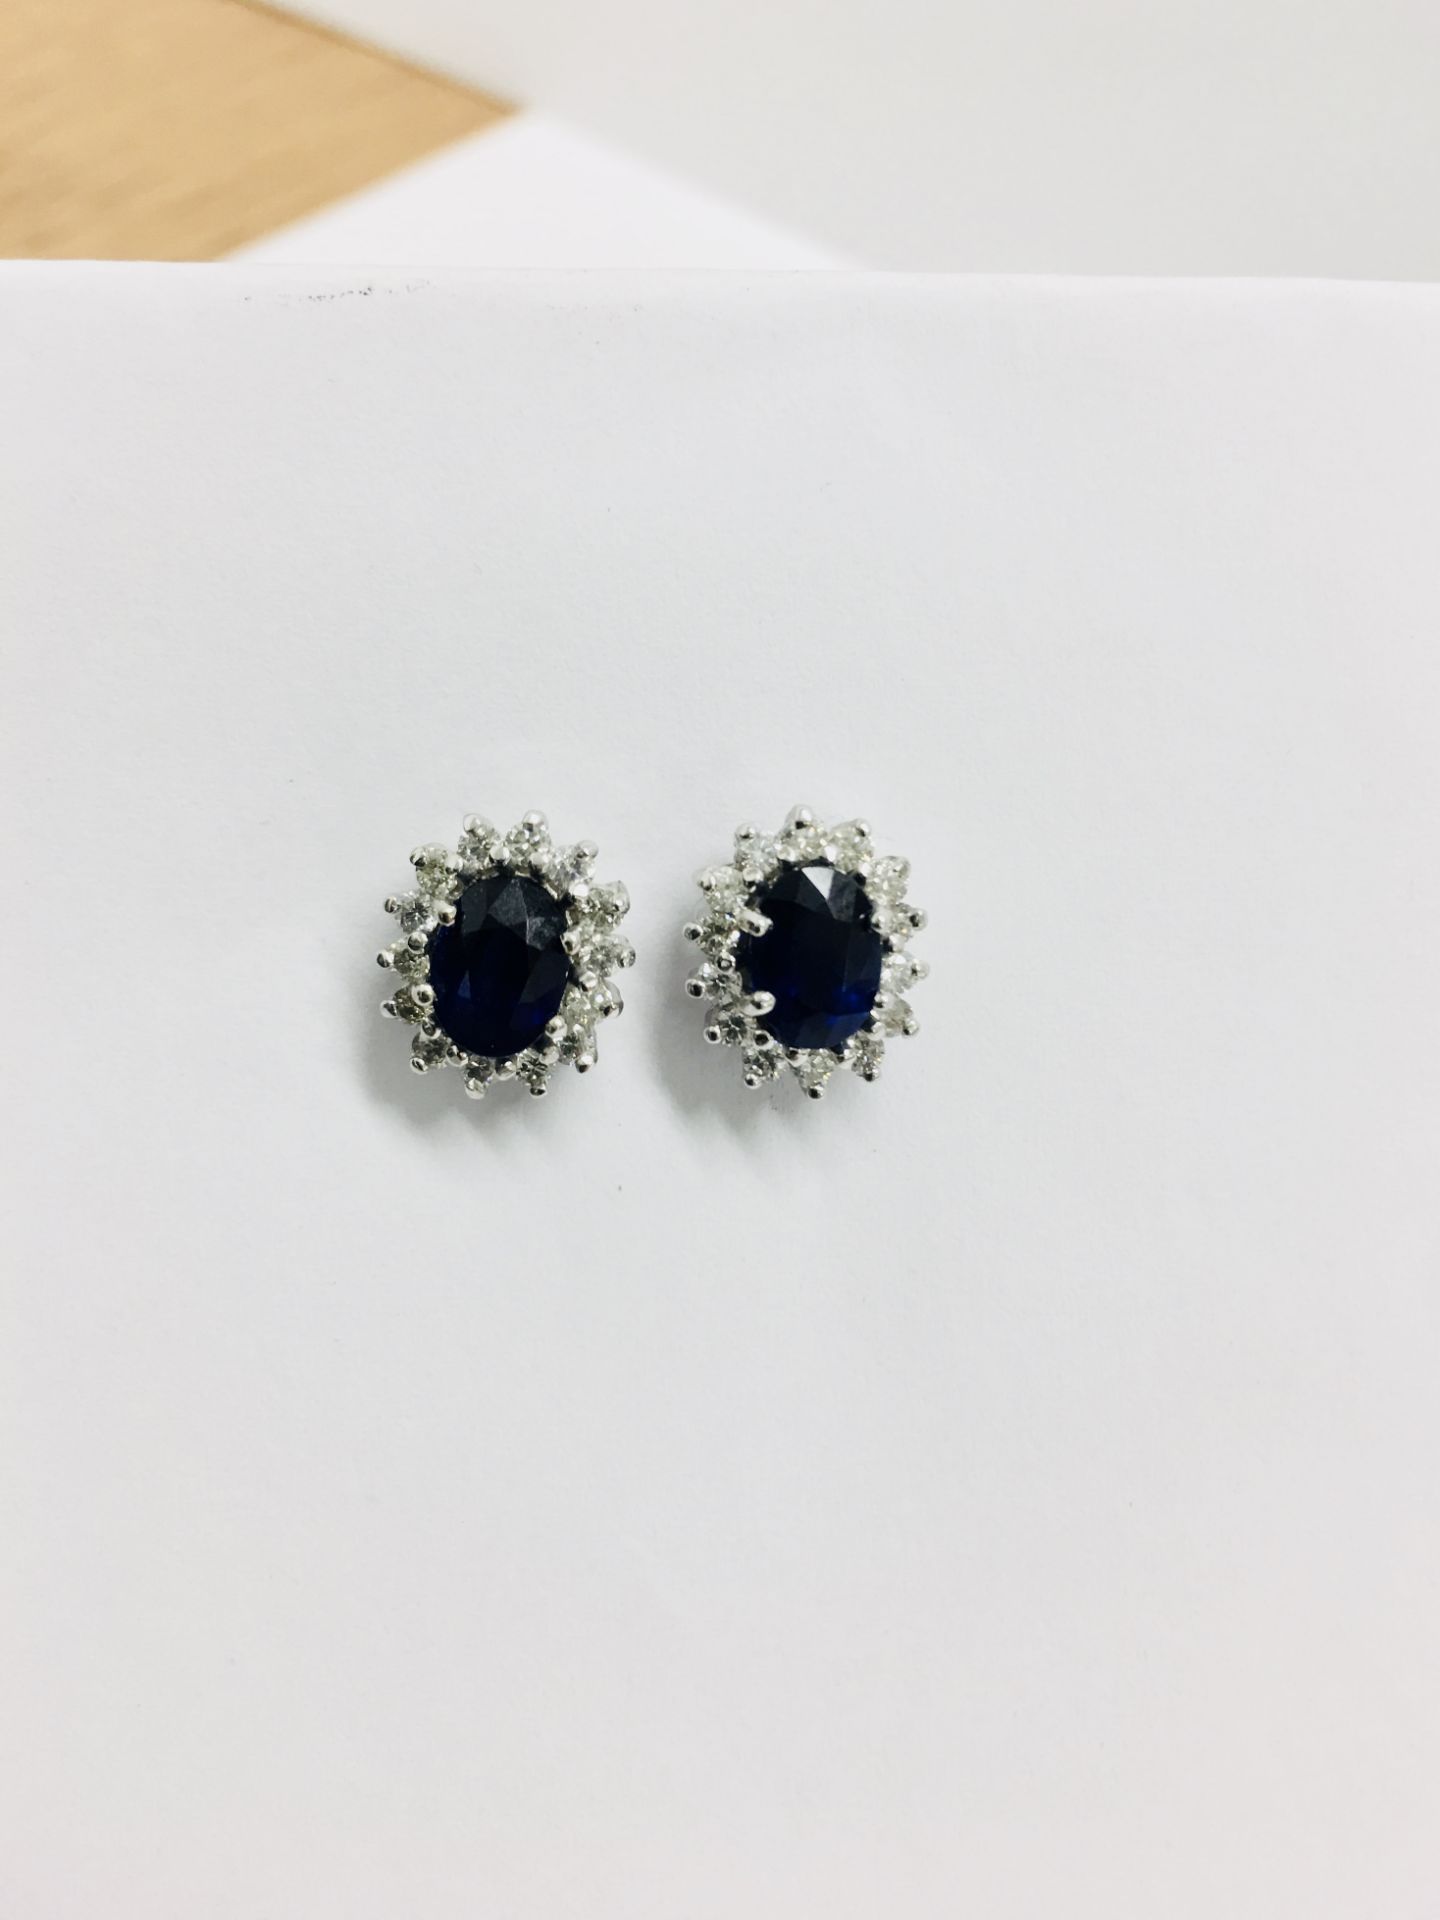 Sapphire diamond Earrings ,1.50ct Sapphire natural (6mmx4mm each),0.36ct diamonds ,9ct white gold - Image 4 of 5